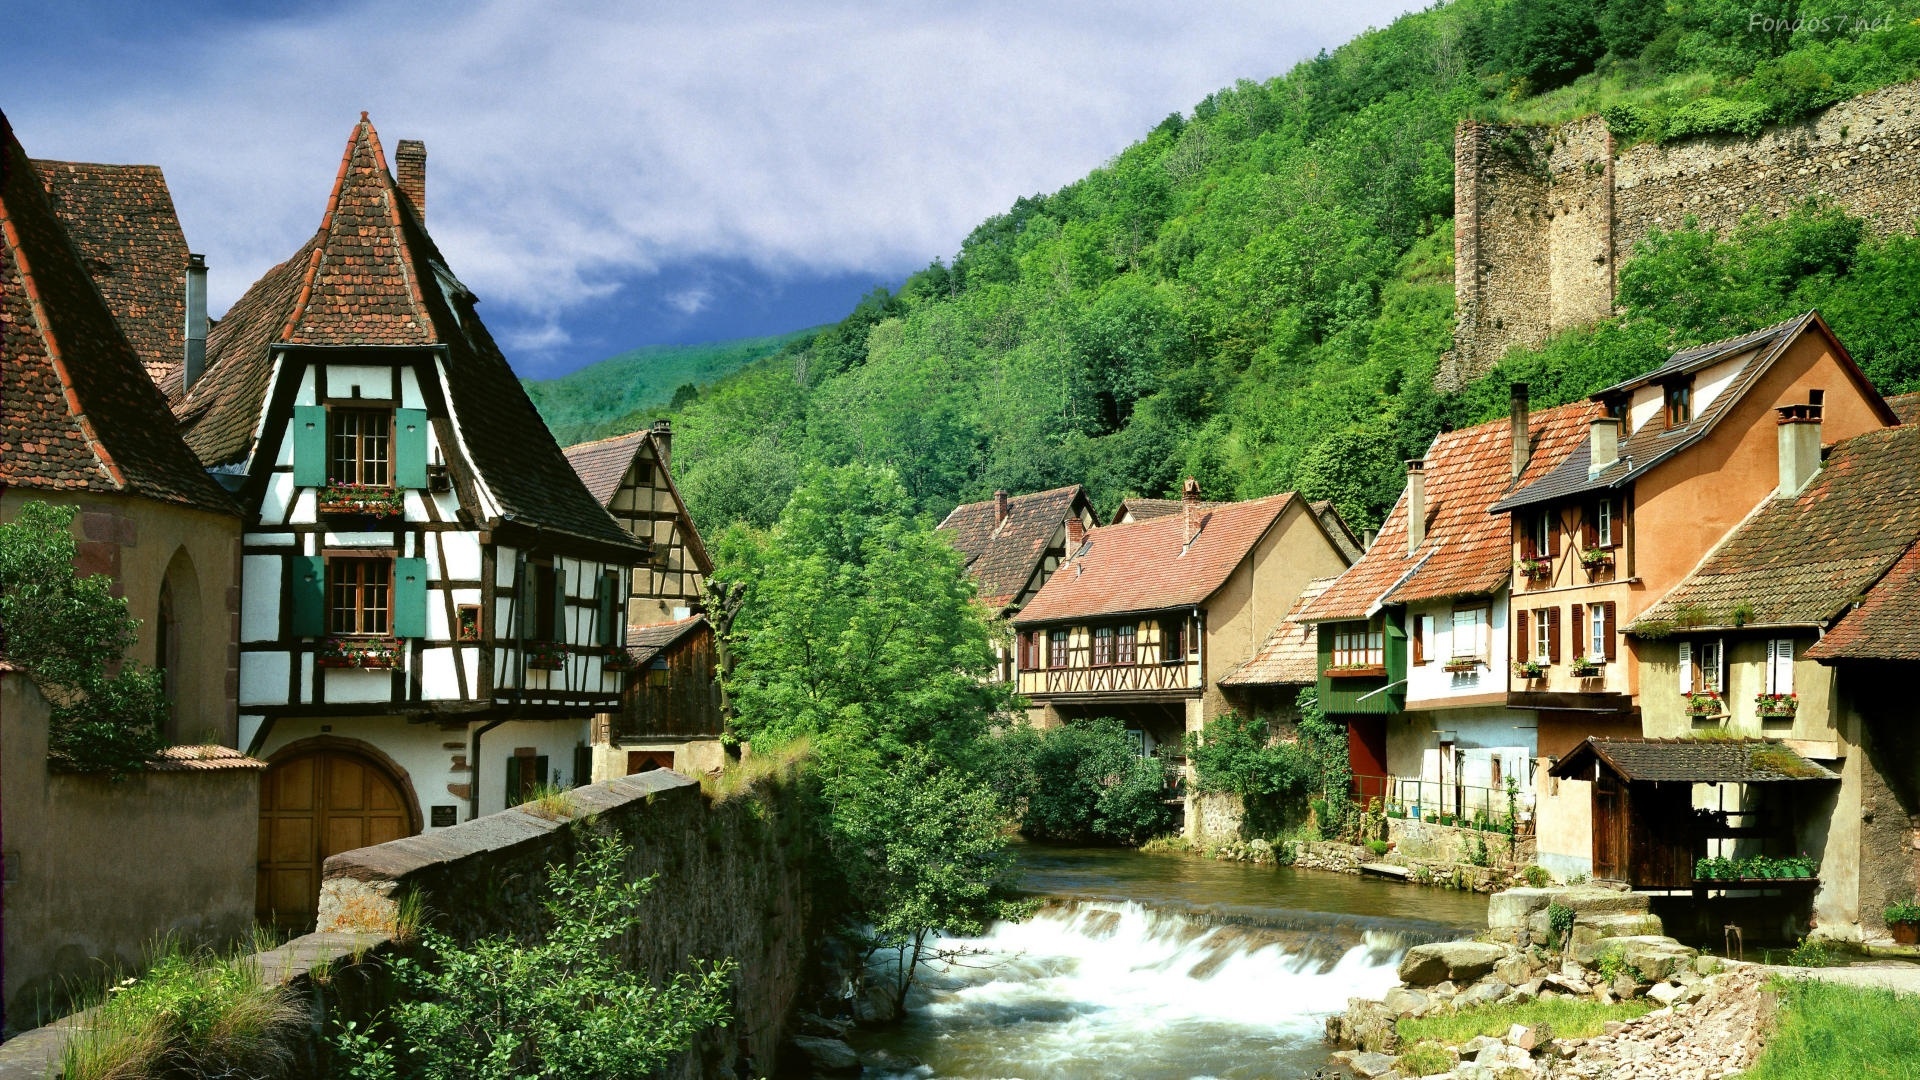 French mountain village, Nature's oasis, Scenic wonder, Tranquil haven, 1920x1080 Full HD Desktop